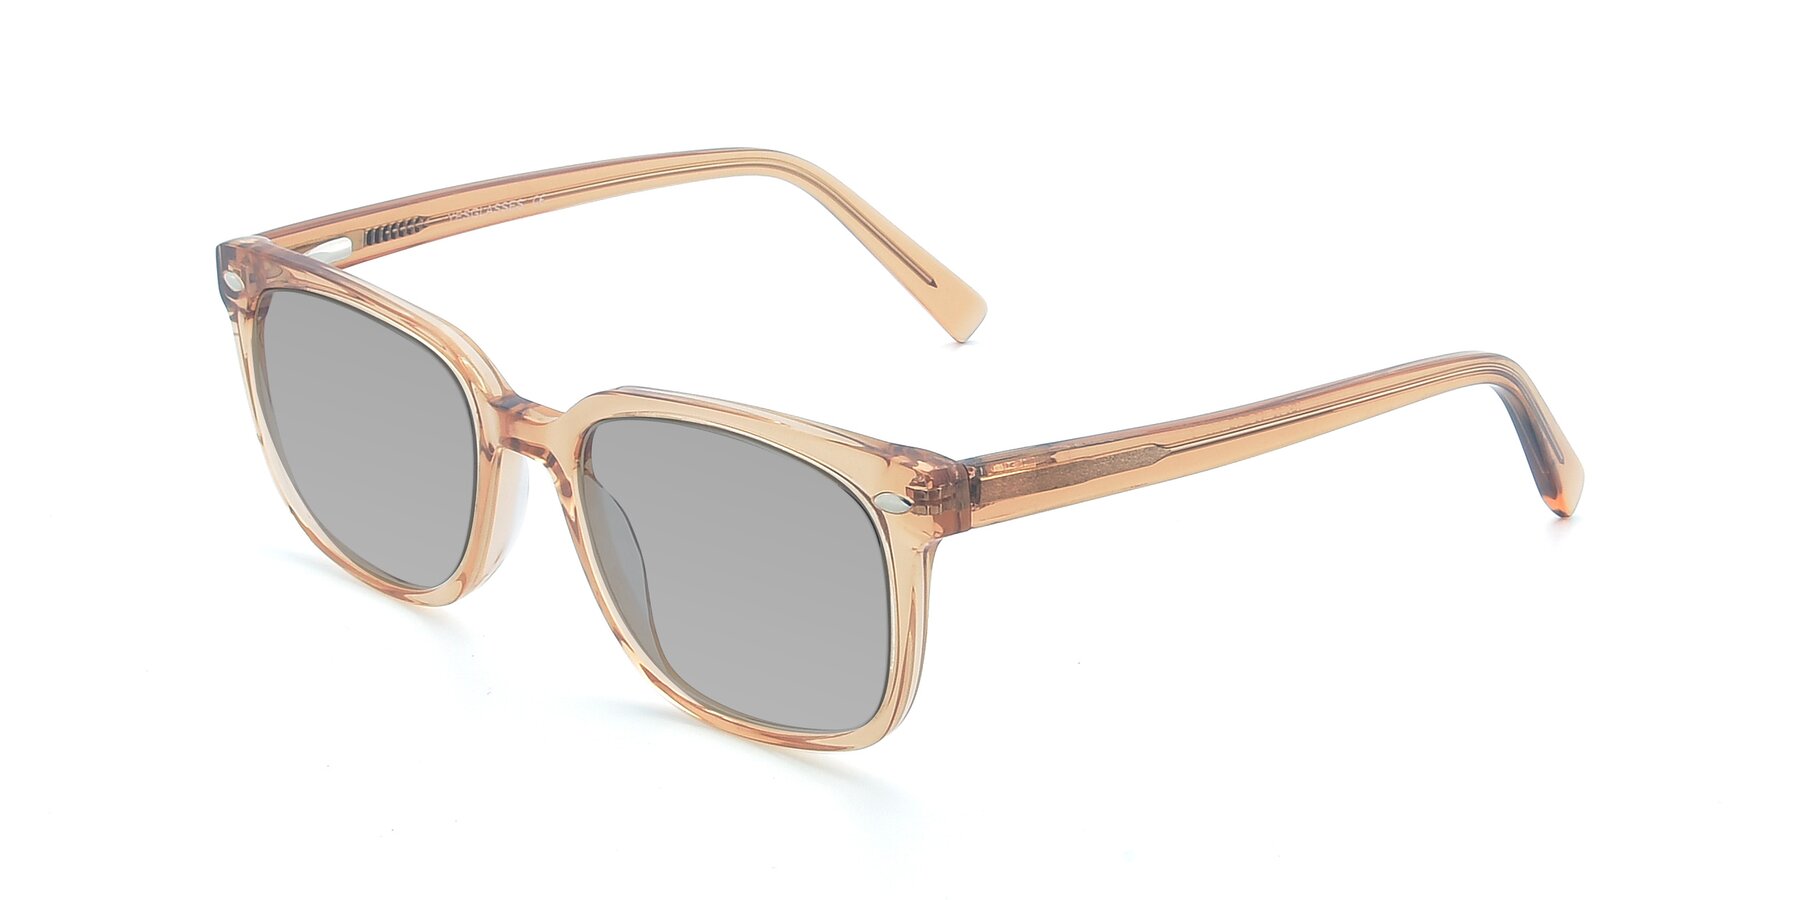 Angle of 17349 in Transparent Caramel with Light Gray Tinted Lenses